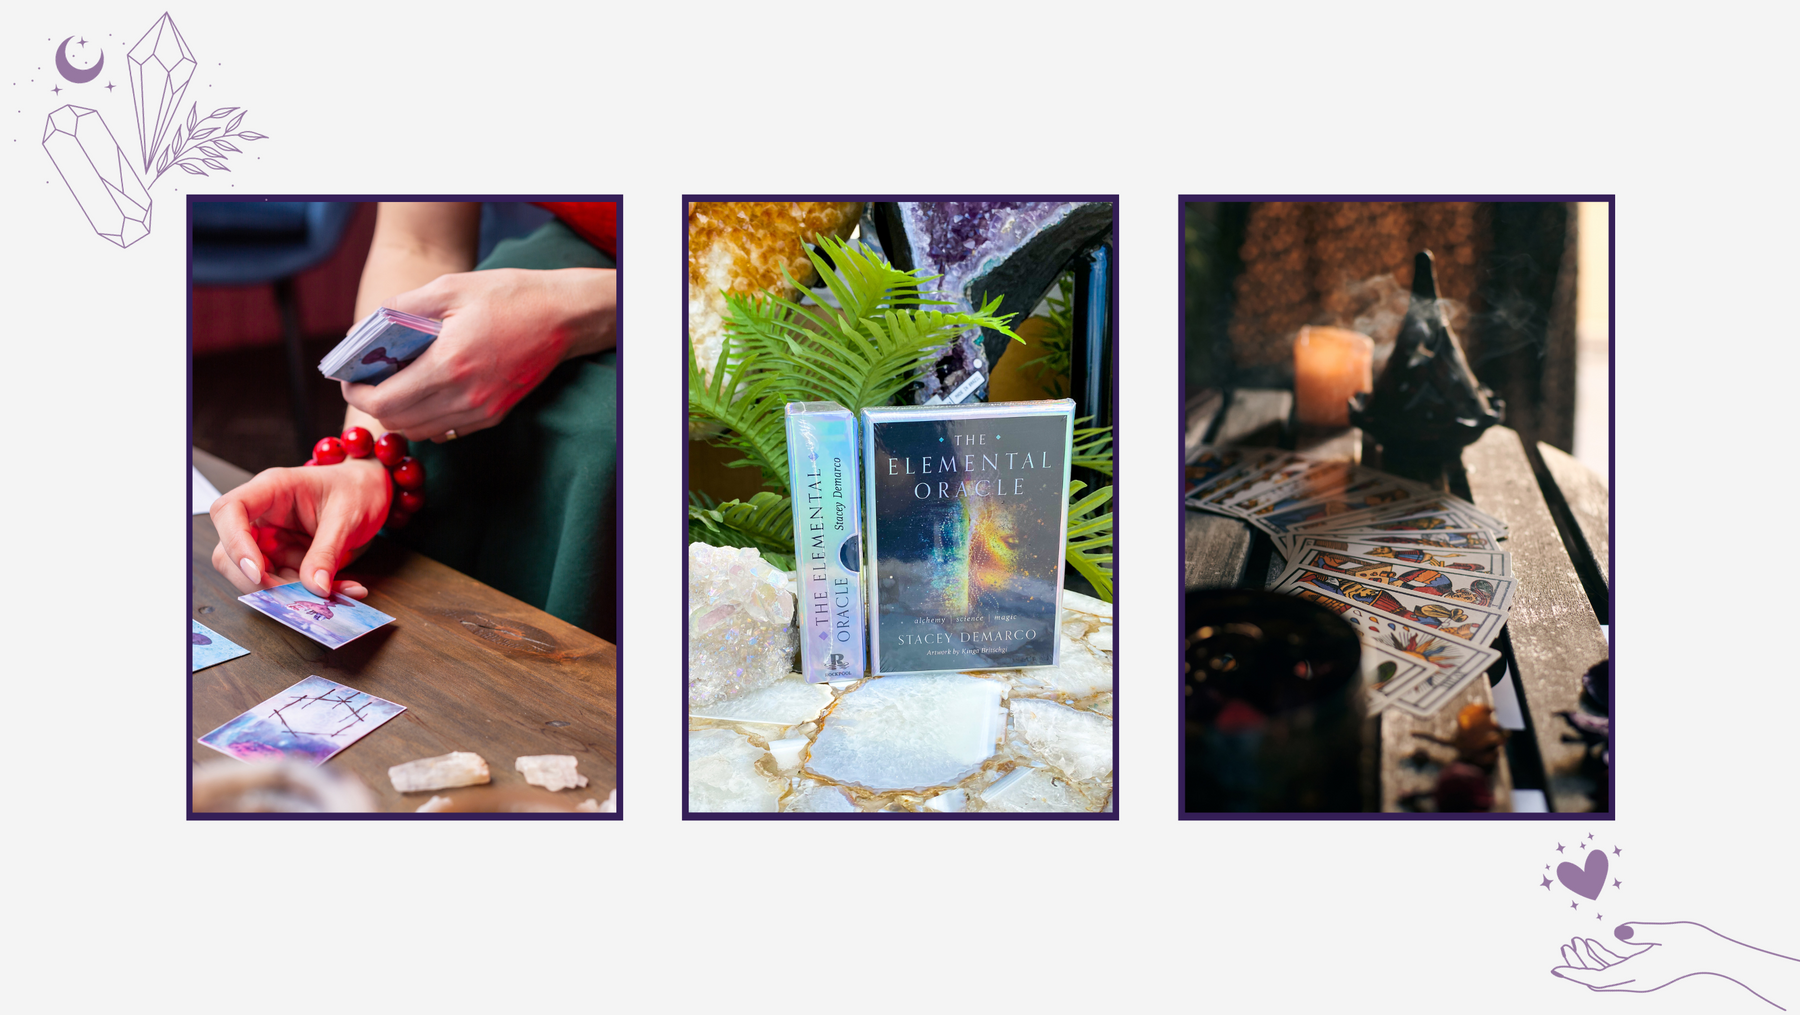 Invite yourself to the world of Learning through Crystal Books & Tarot Cards